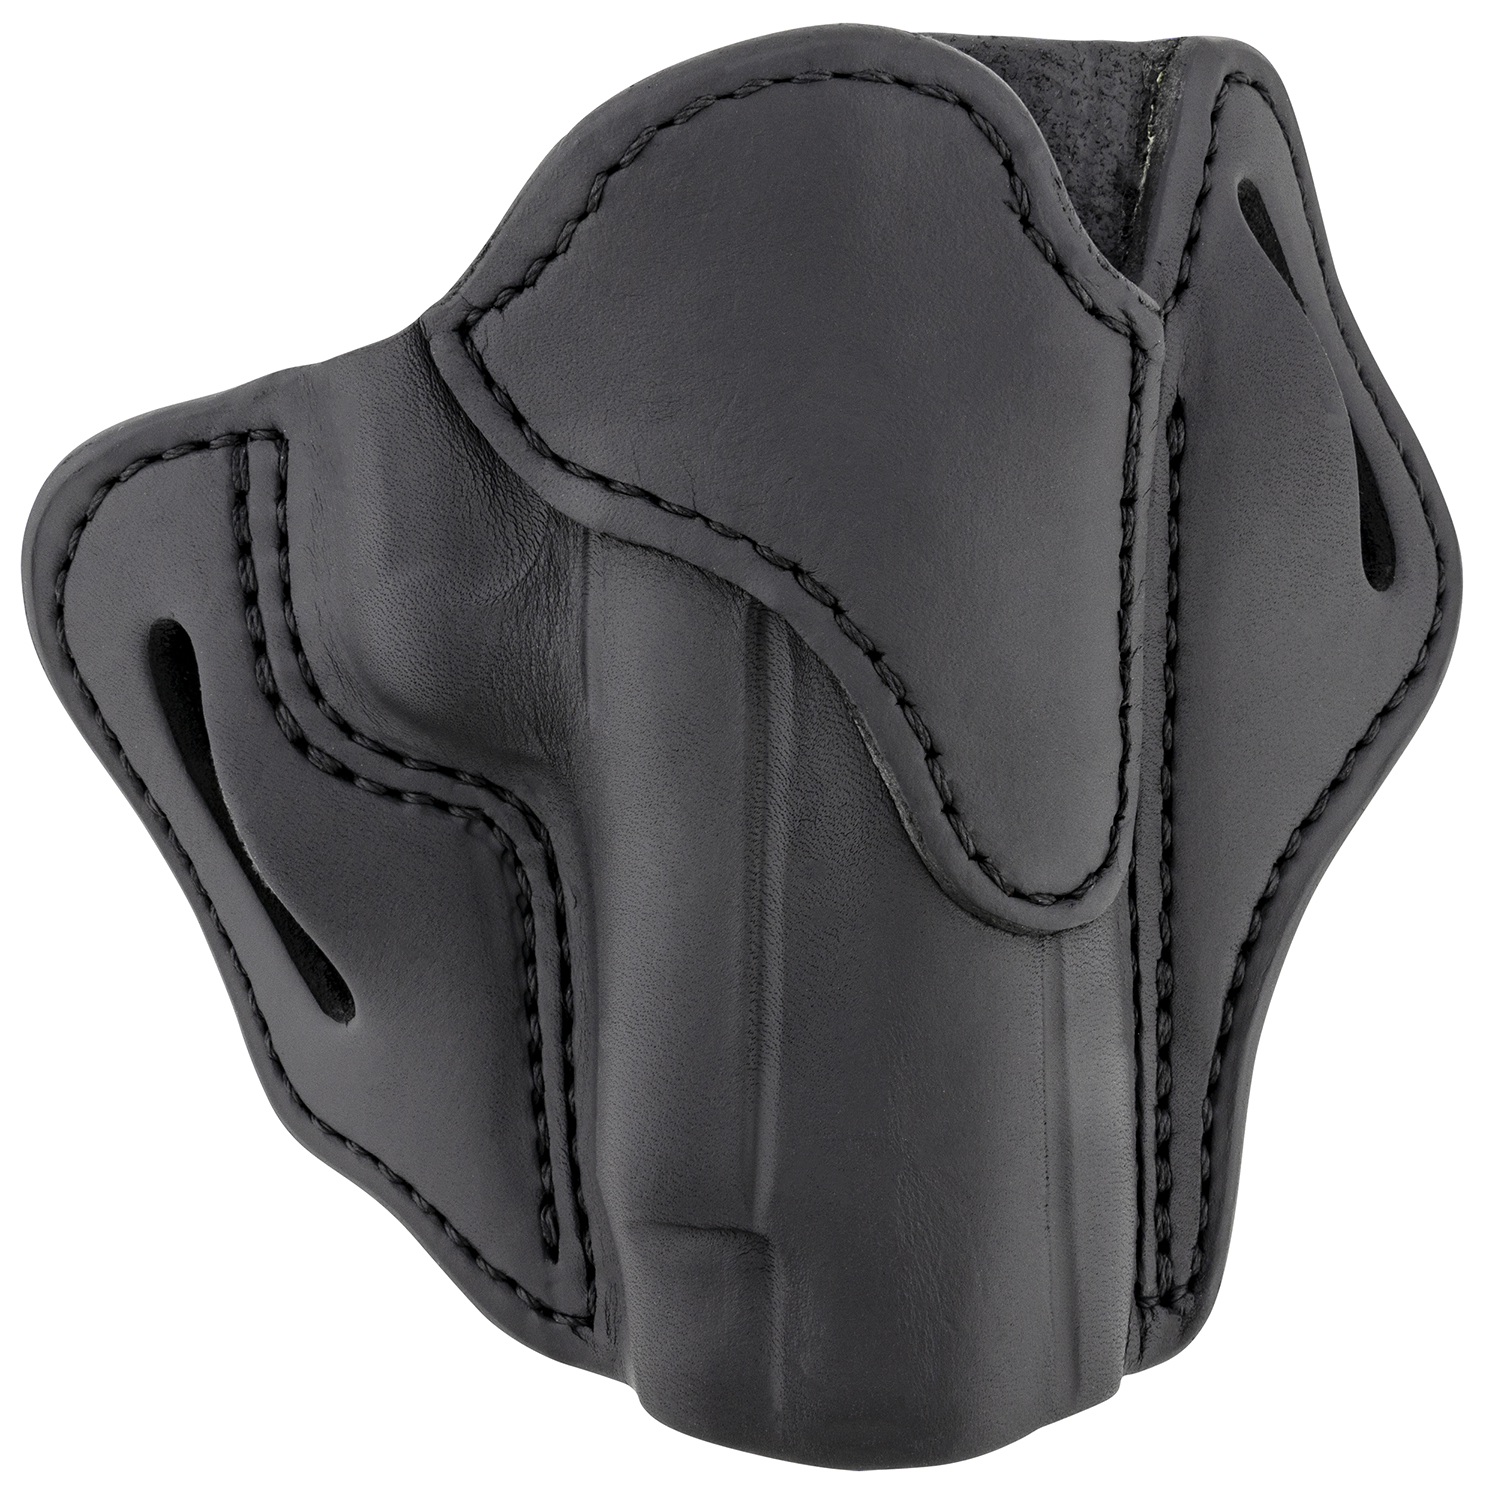 1791 Gunleather ORBH23SBLR BH2.3 Optic Ready OWB Size 2.3 Stealth Black Leather Belt Slide Compatible w/Glock 17/S&W M&P Shield/Walther PPQ Right Hand